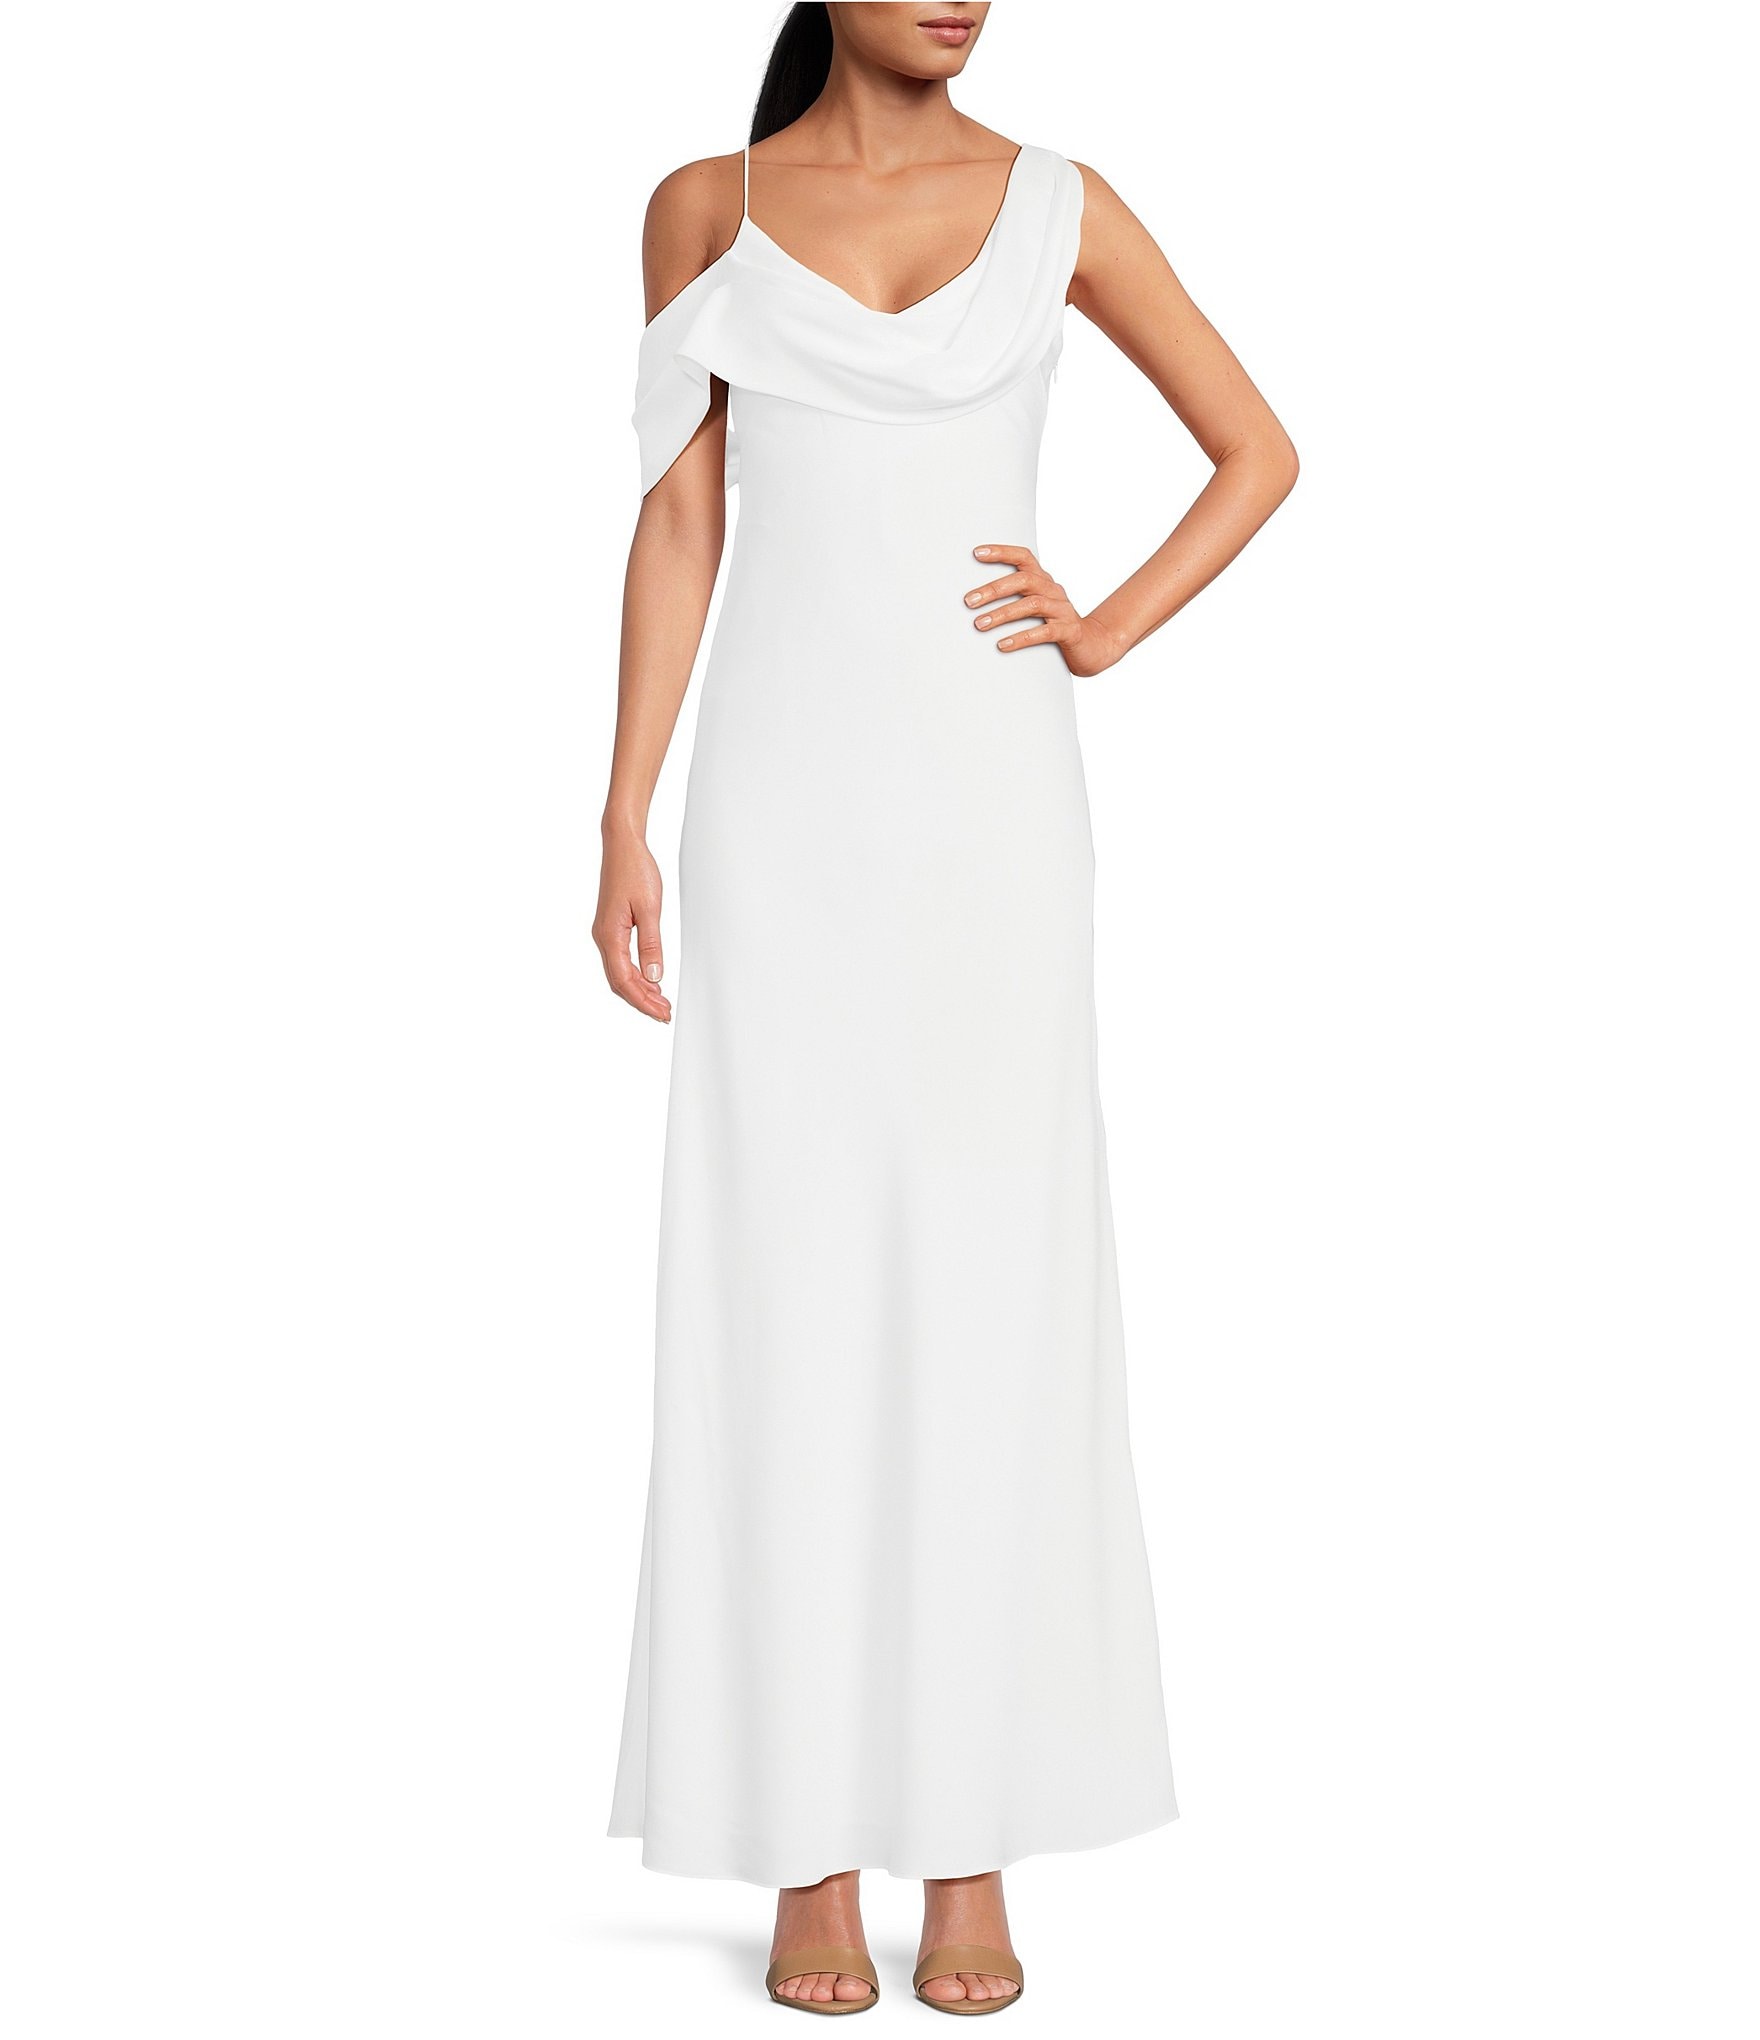 White Women's Contemporary Formal Dresses & Gowns | Dillard's